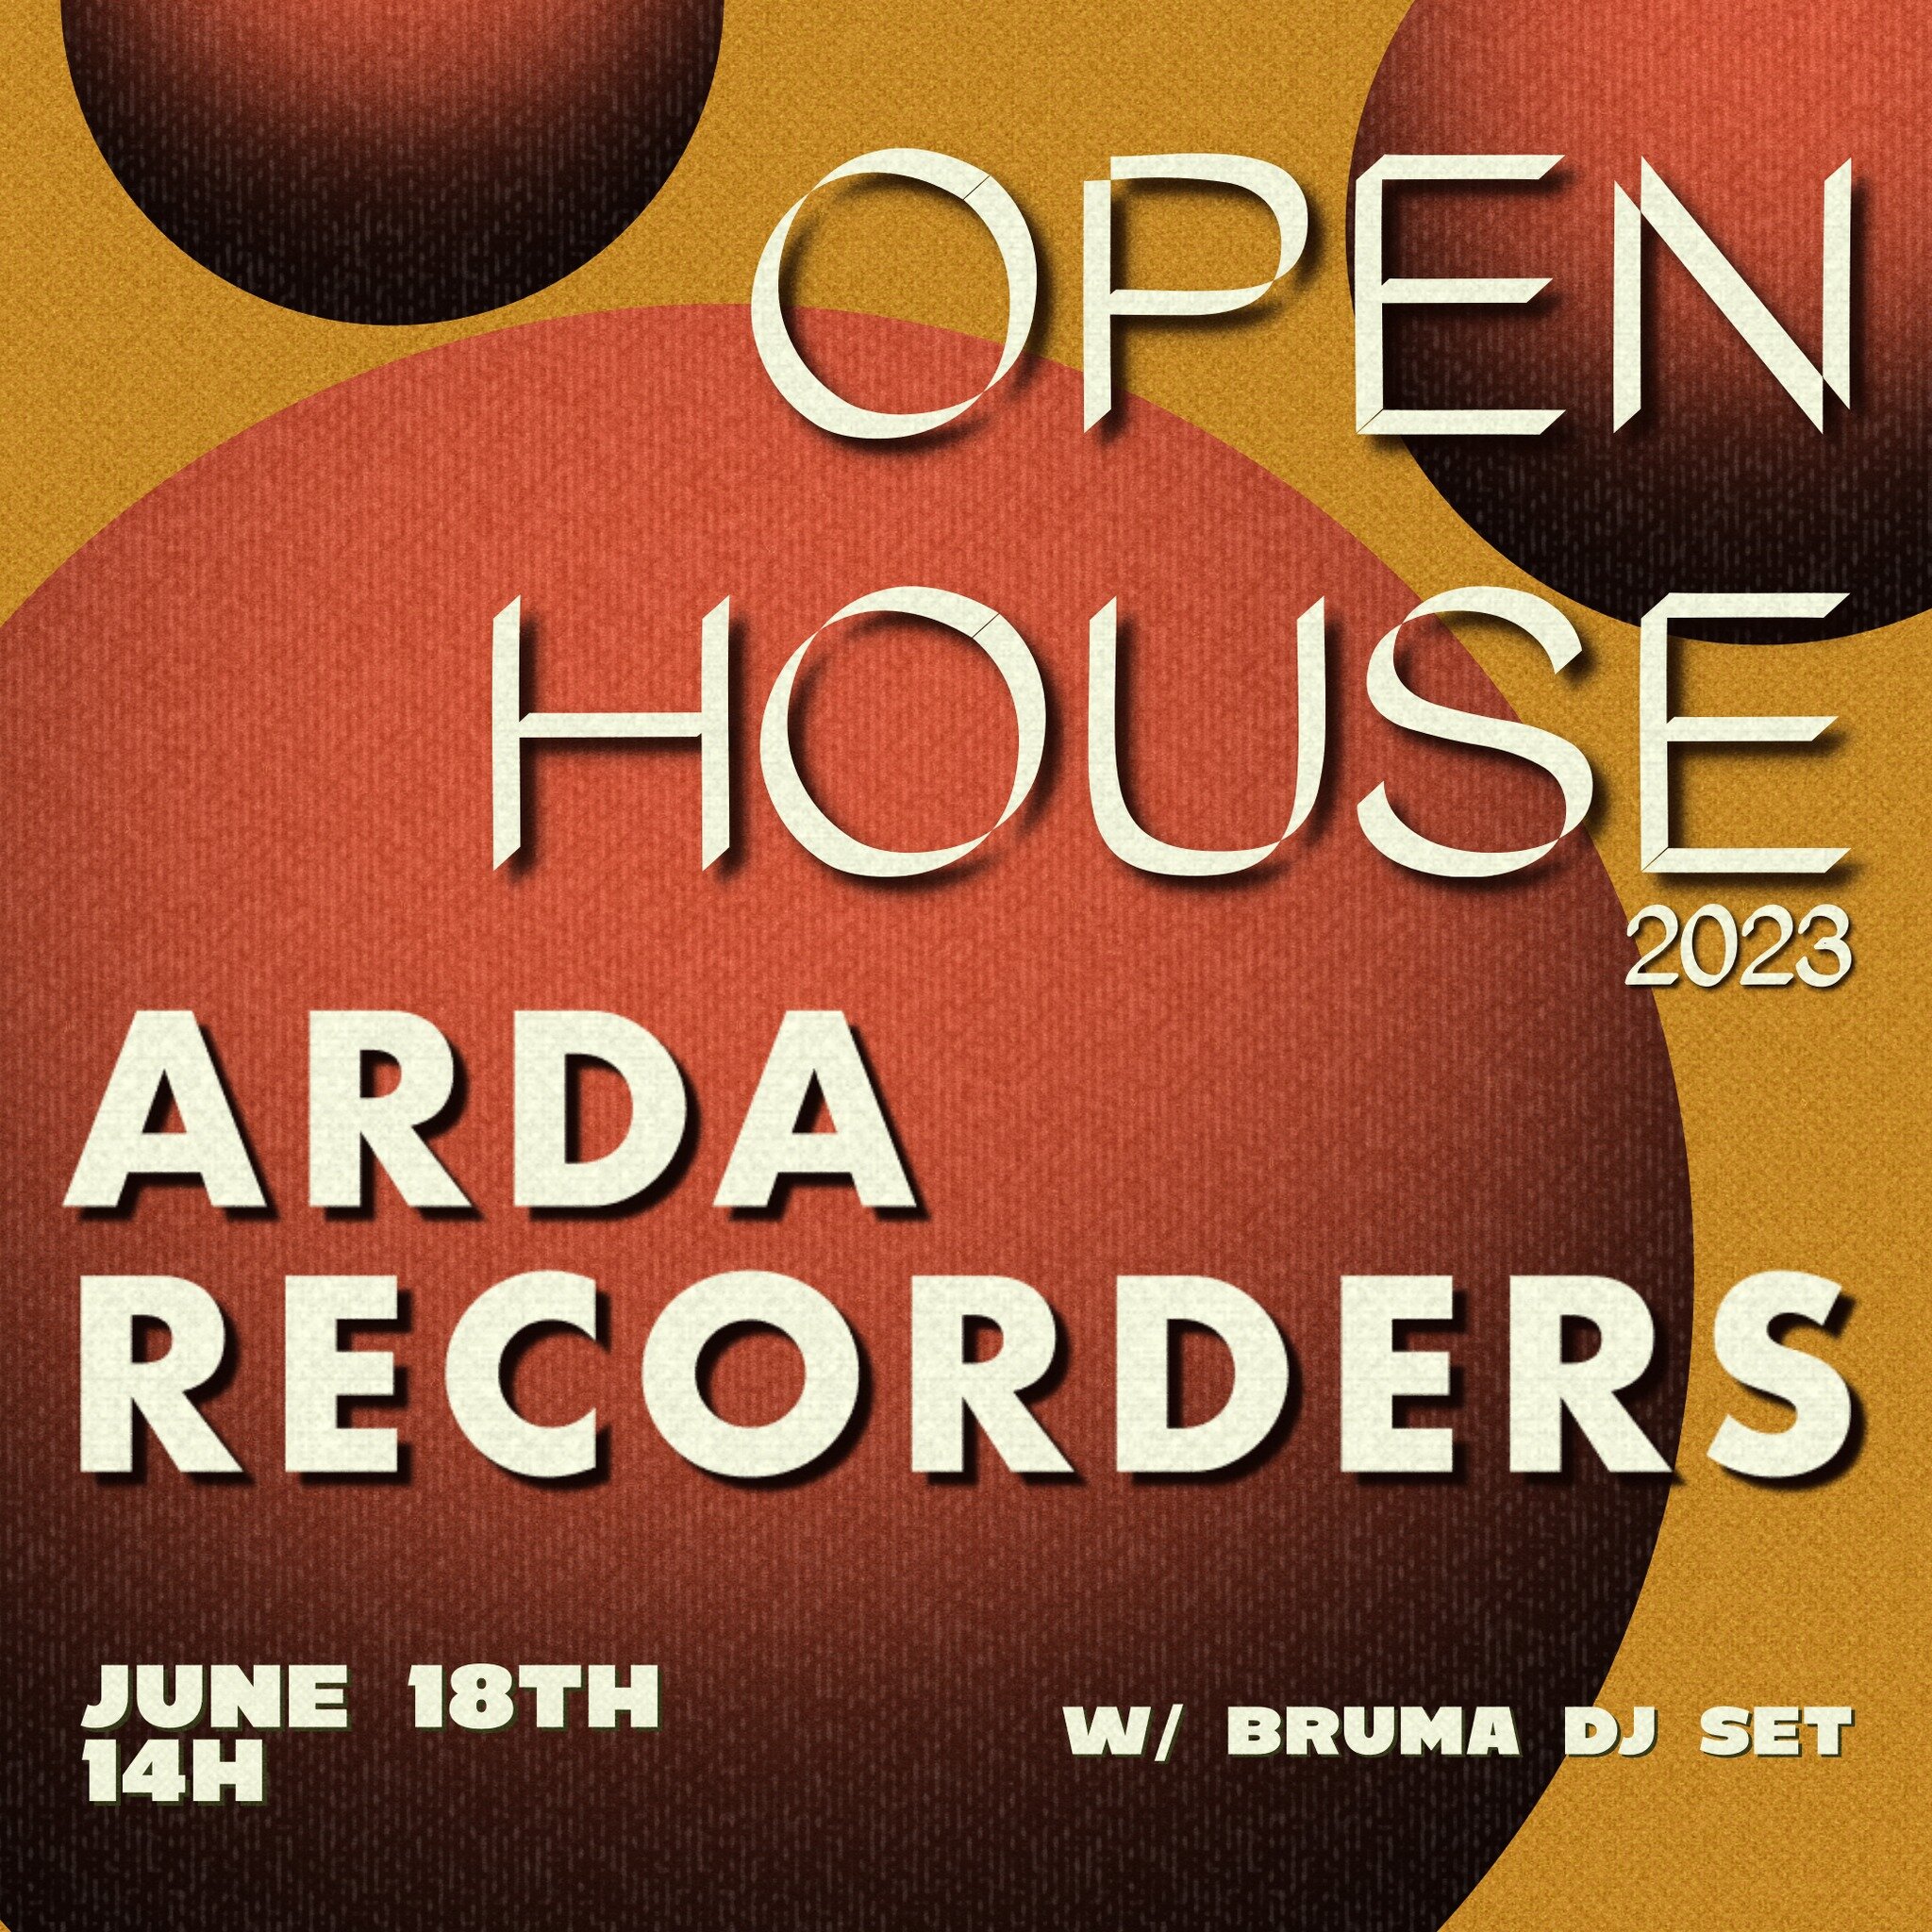 We&rsquo;re back with the Open House 🏡
On Sunday, June 18th, from 2 PM we will have studio tours by the in-house engineers and music in the garden from @b_brumaa!
The event has free admission and fun is guaranteed. See you at our place?

Media partn